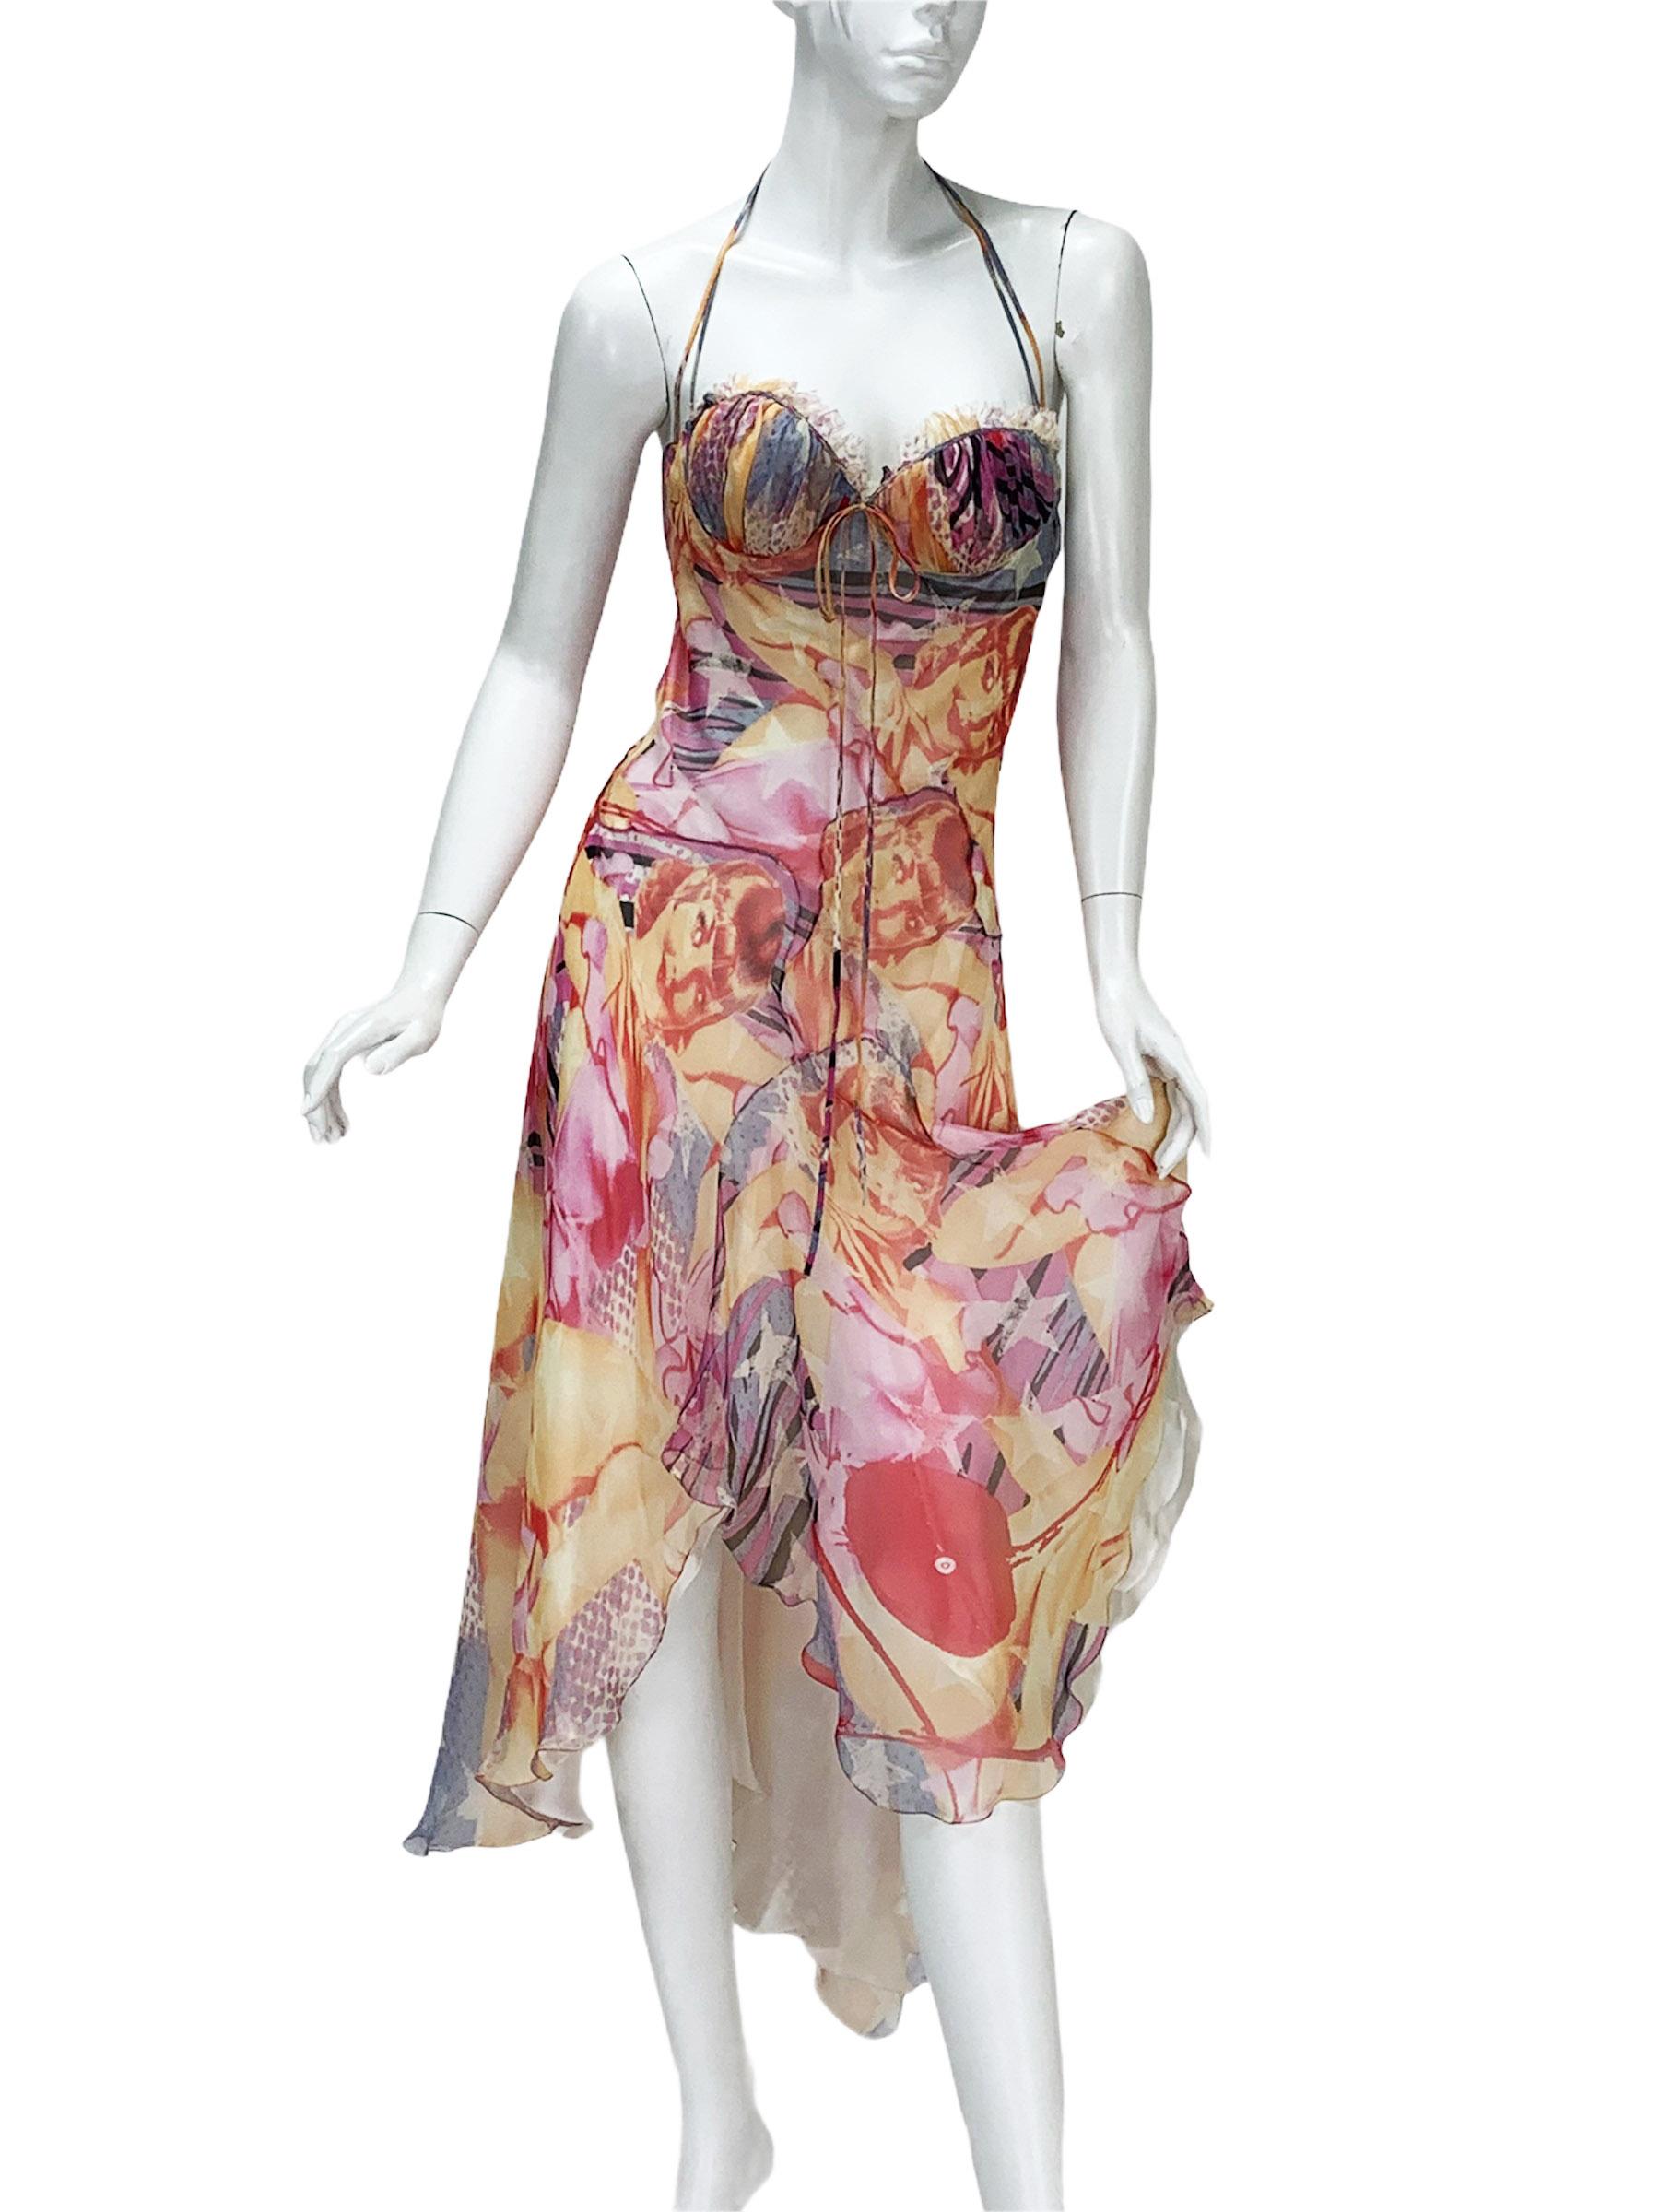 Alexander McQueen Silk Halter High-Low *Americana* Print Dress
2003 Collection
Designer size - 38
92% Silk, 6% Nylon, 2% Spandex.
*Americana* Print, High-Low Style, Slip-On ( no zipper ), Build-in Cups, Bow-accent, Fully Lined.
Excellent Vintage